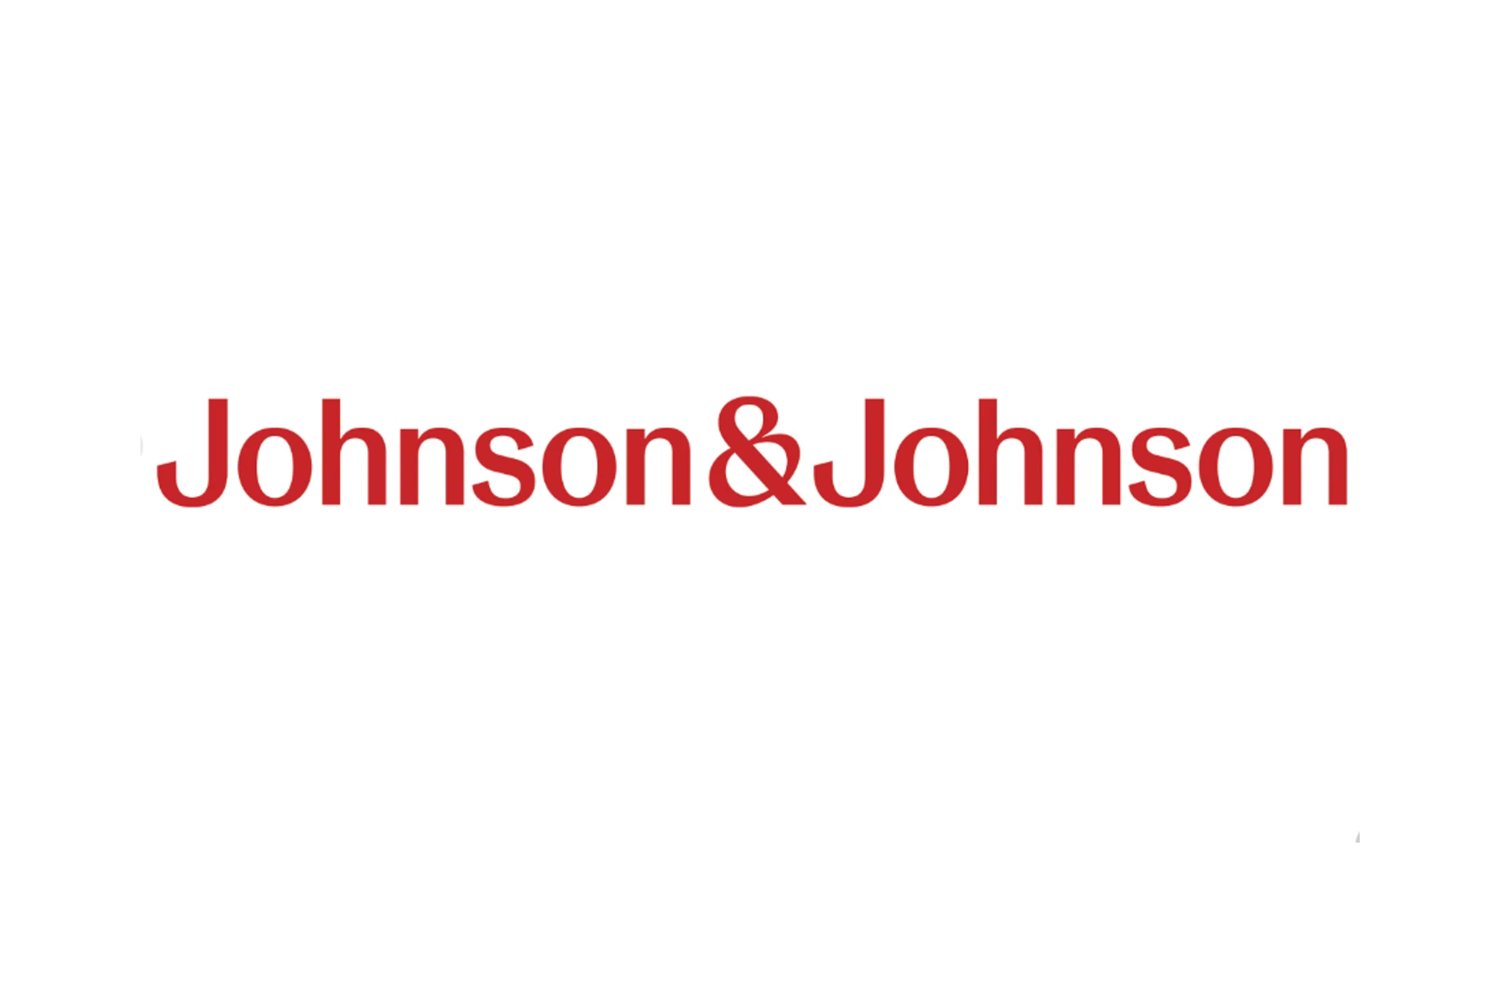 Johnson & Johnson Announces Major Brand Refresh (And, Yes, There’s a New Non-Cursive Logo)